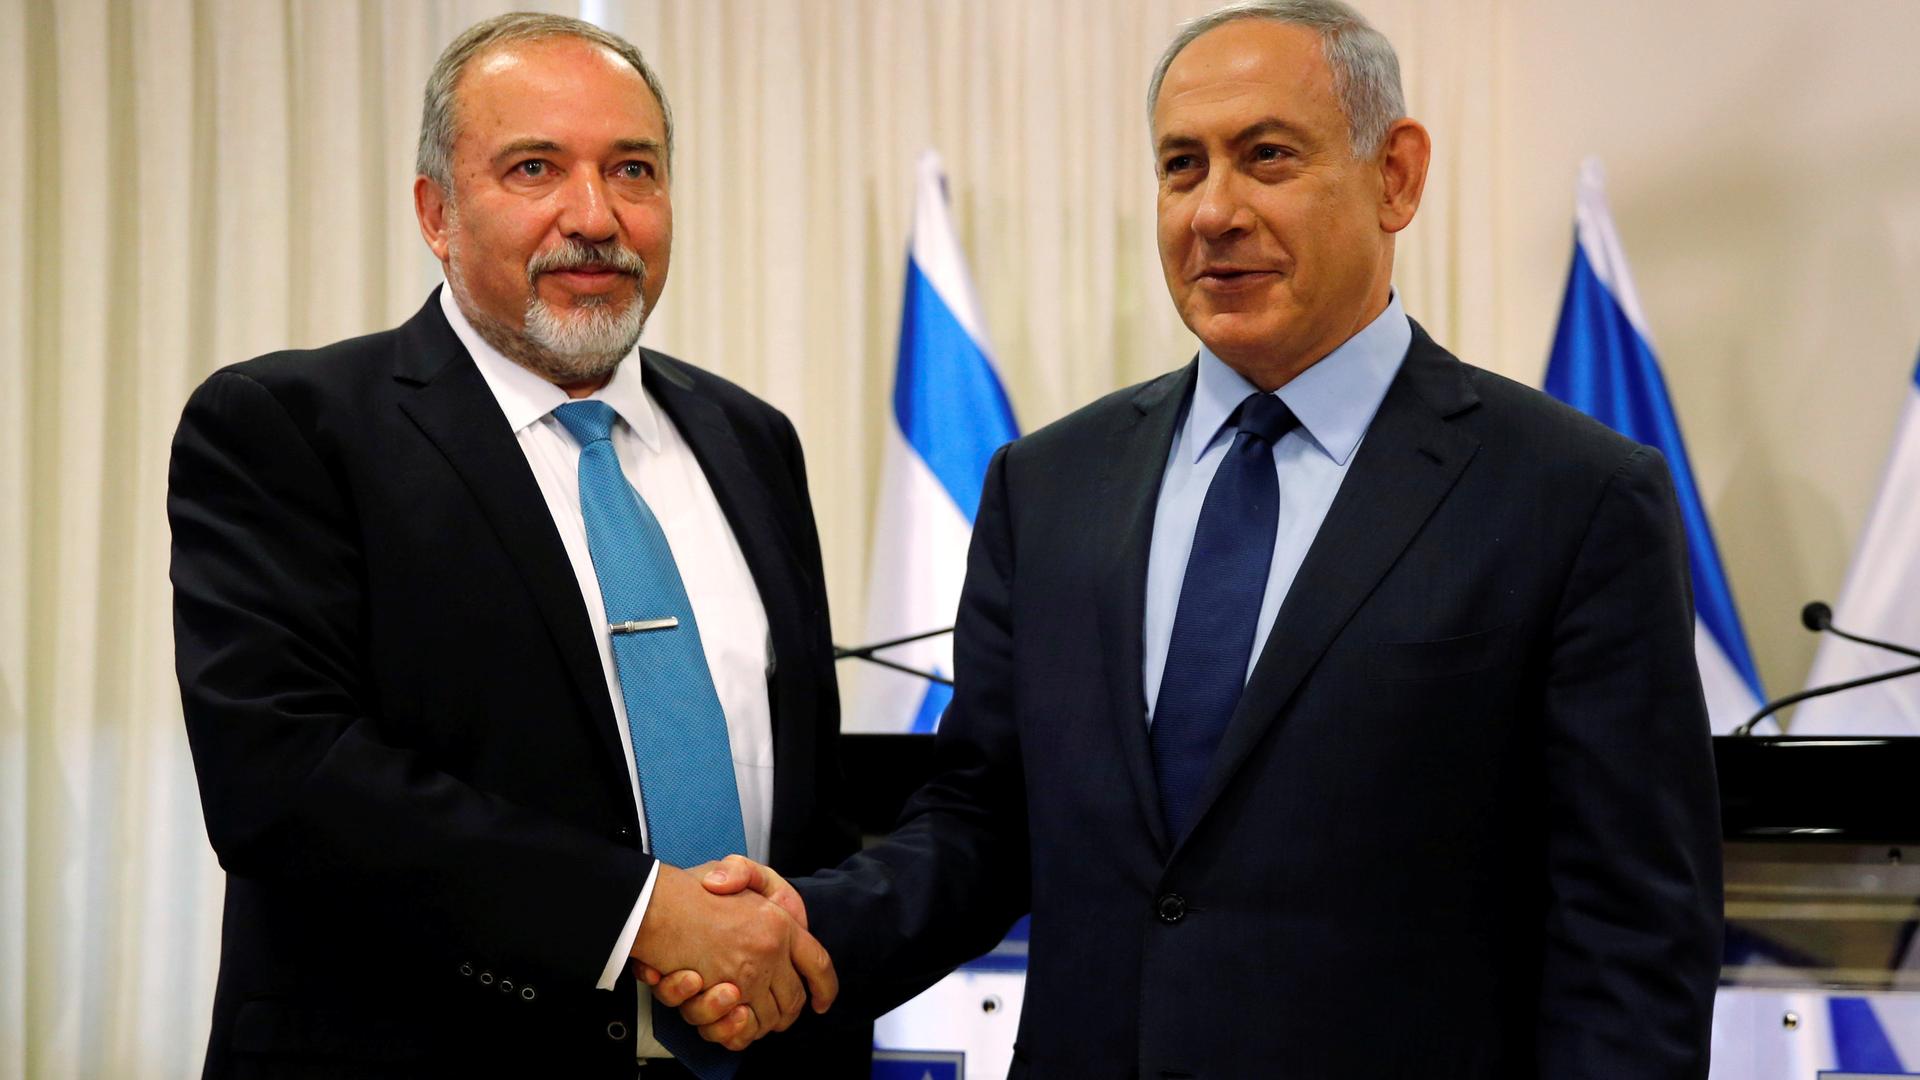 Avigdor Lieberman (L) and Israeli Prime Minister, Benjamin Netanyahu, after agreeing a new coalition deal last week, which gave Lieberman the Defense Ministry